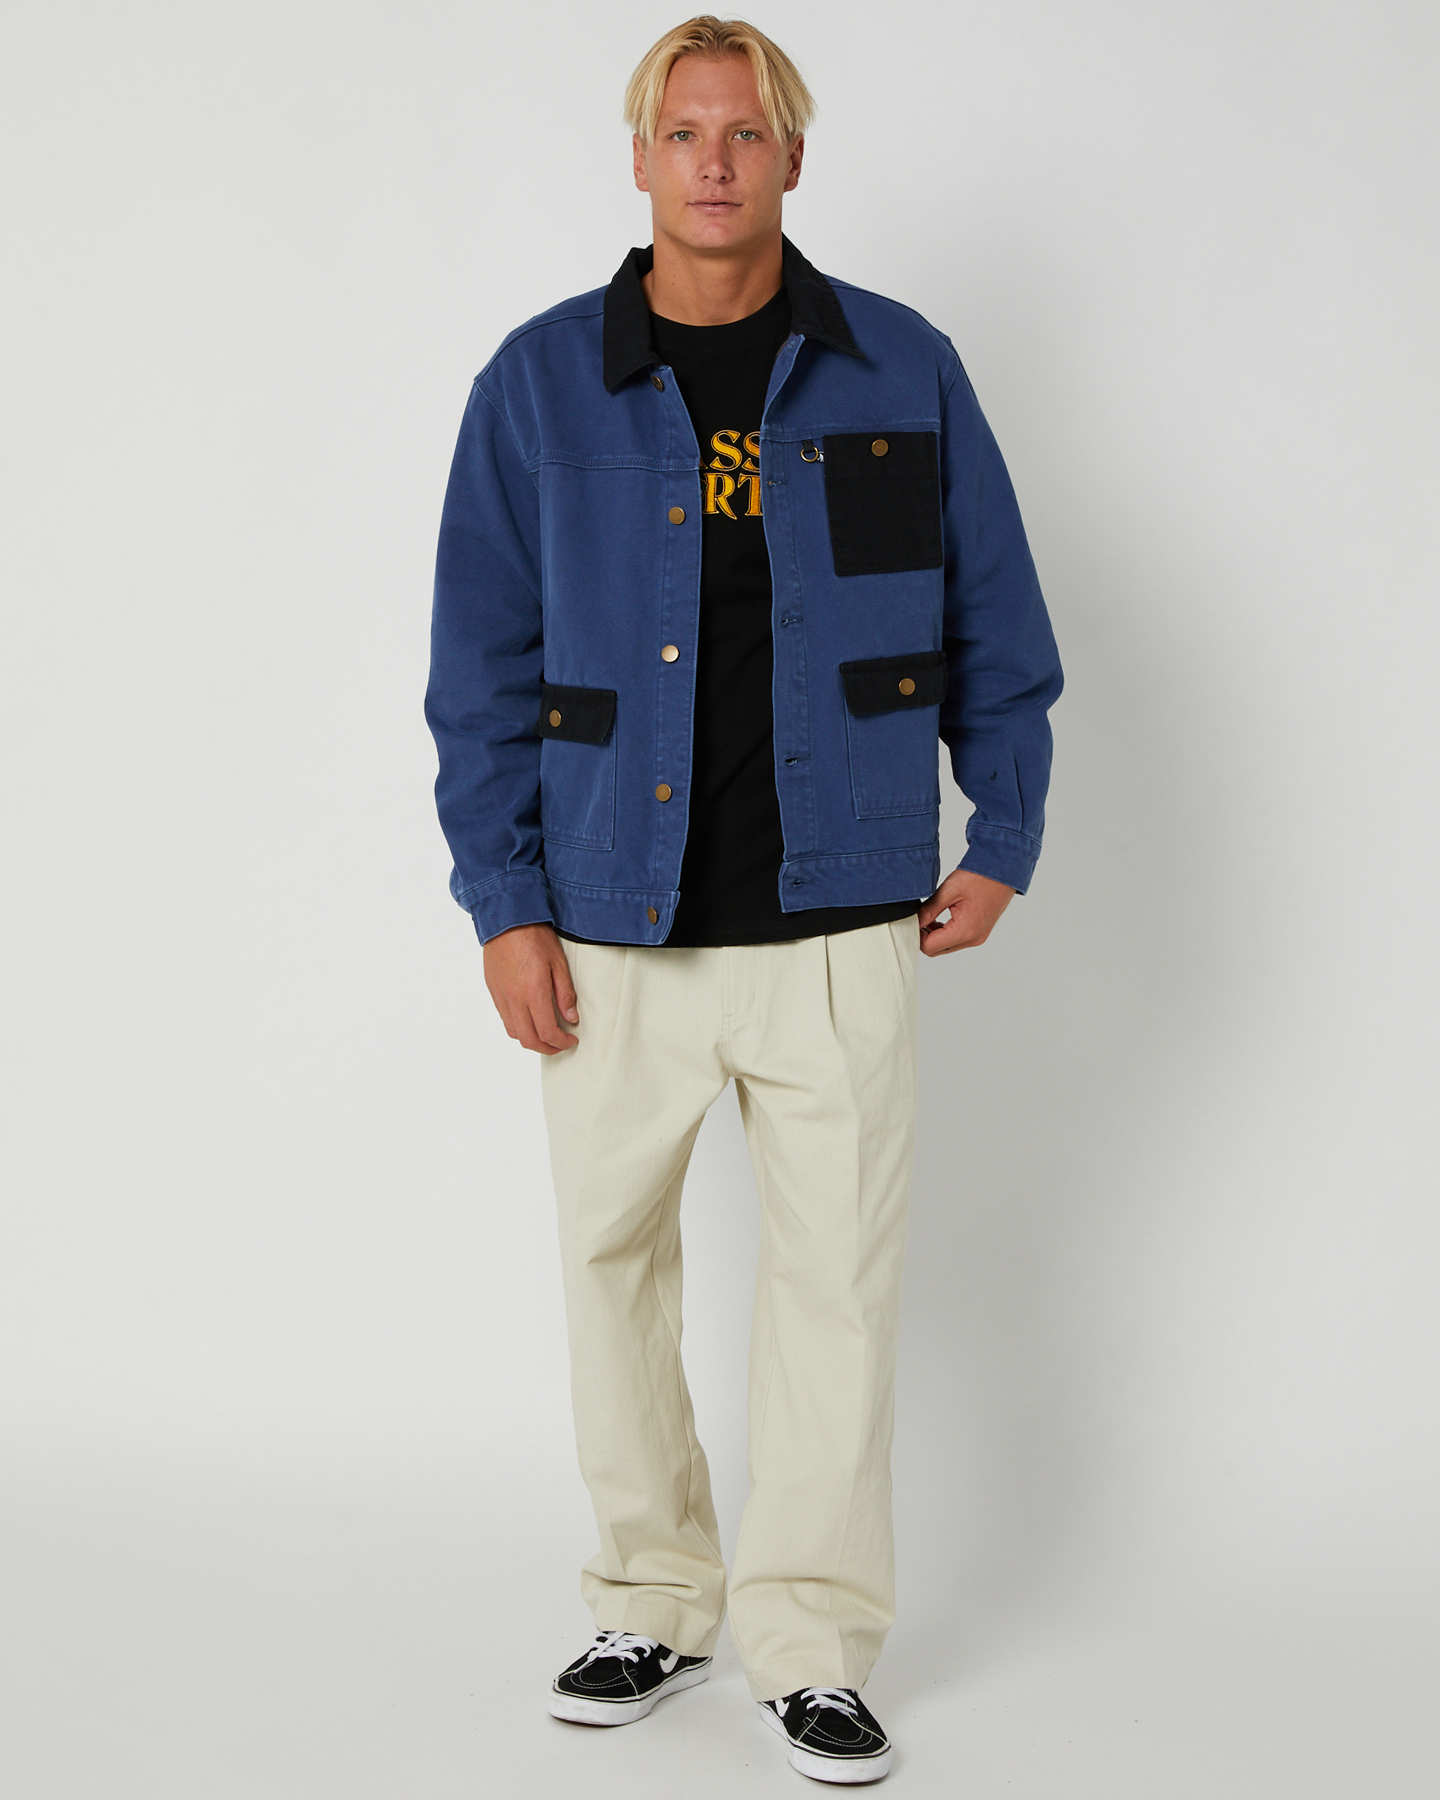 Pass Port Workers Late Jacket - Navy | SurfStitch